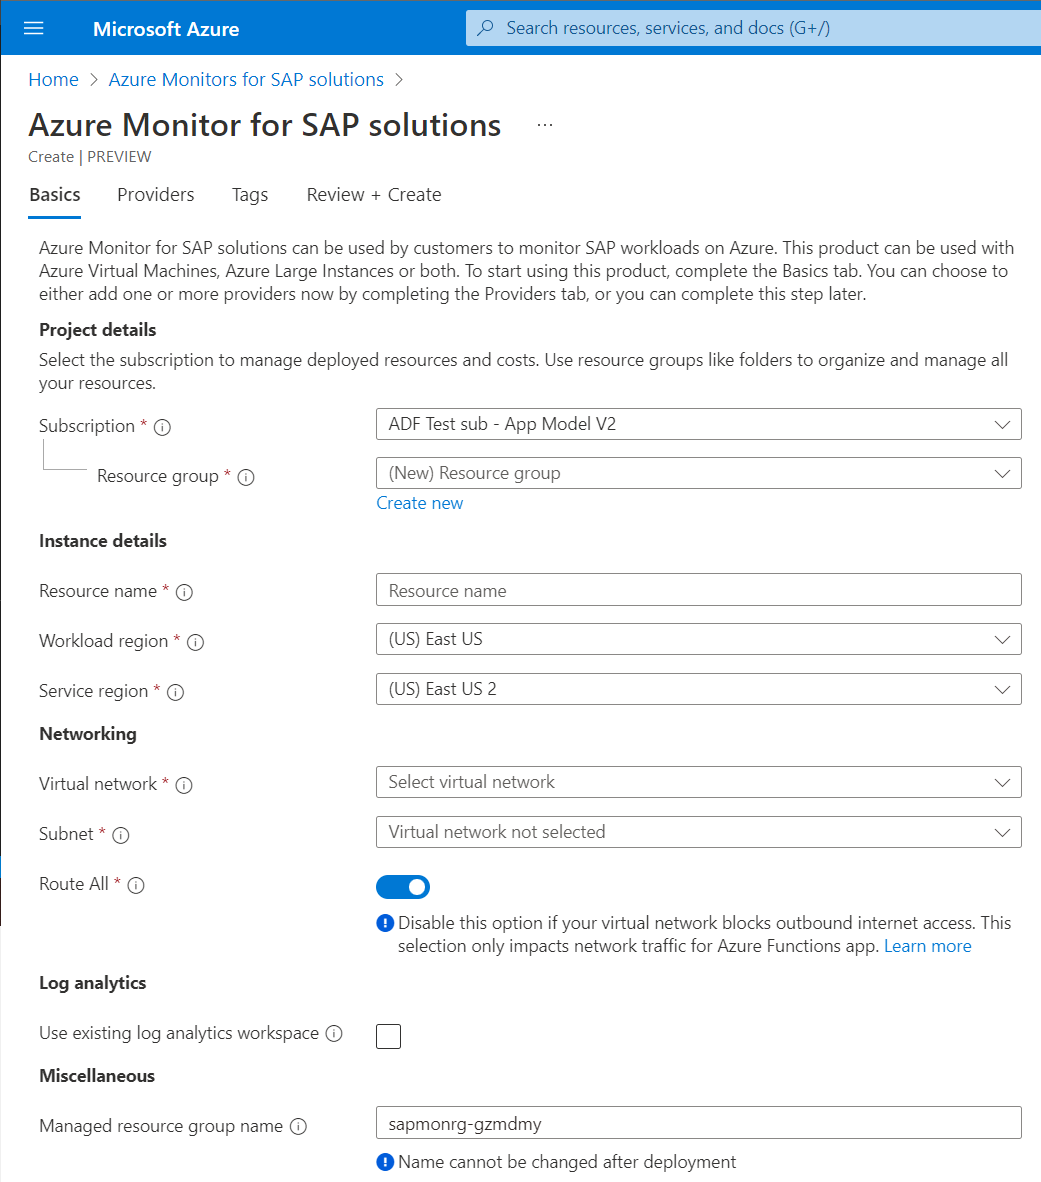 Screenshot that shows basic details for an Azure Monitor for SAP solutions instance.